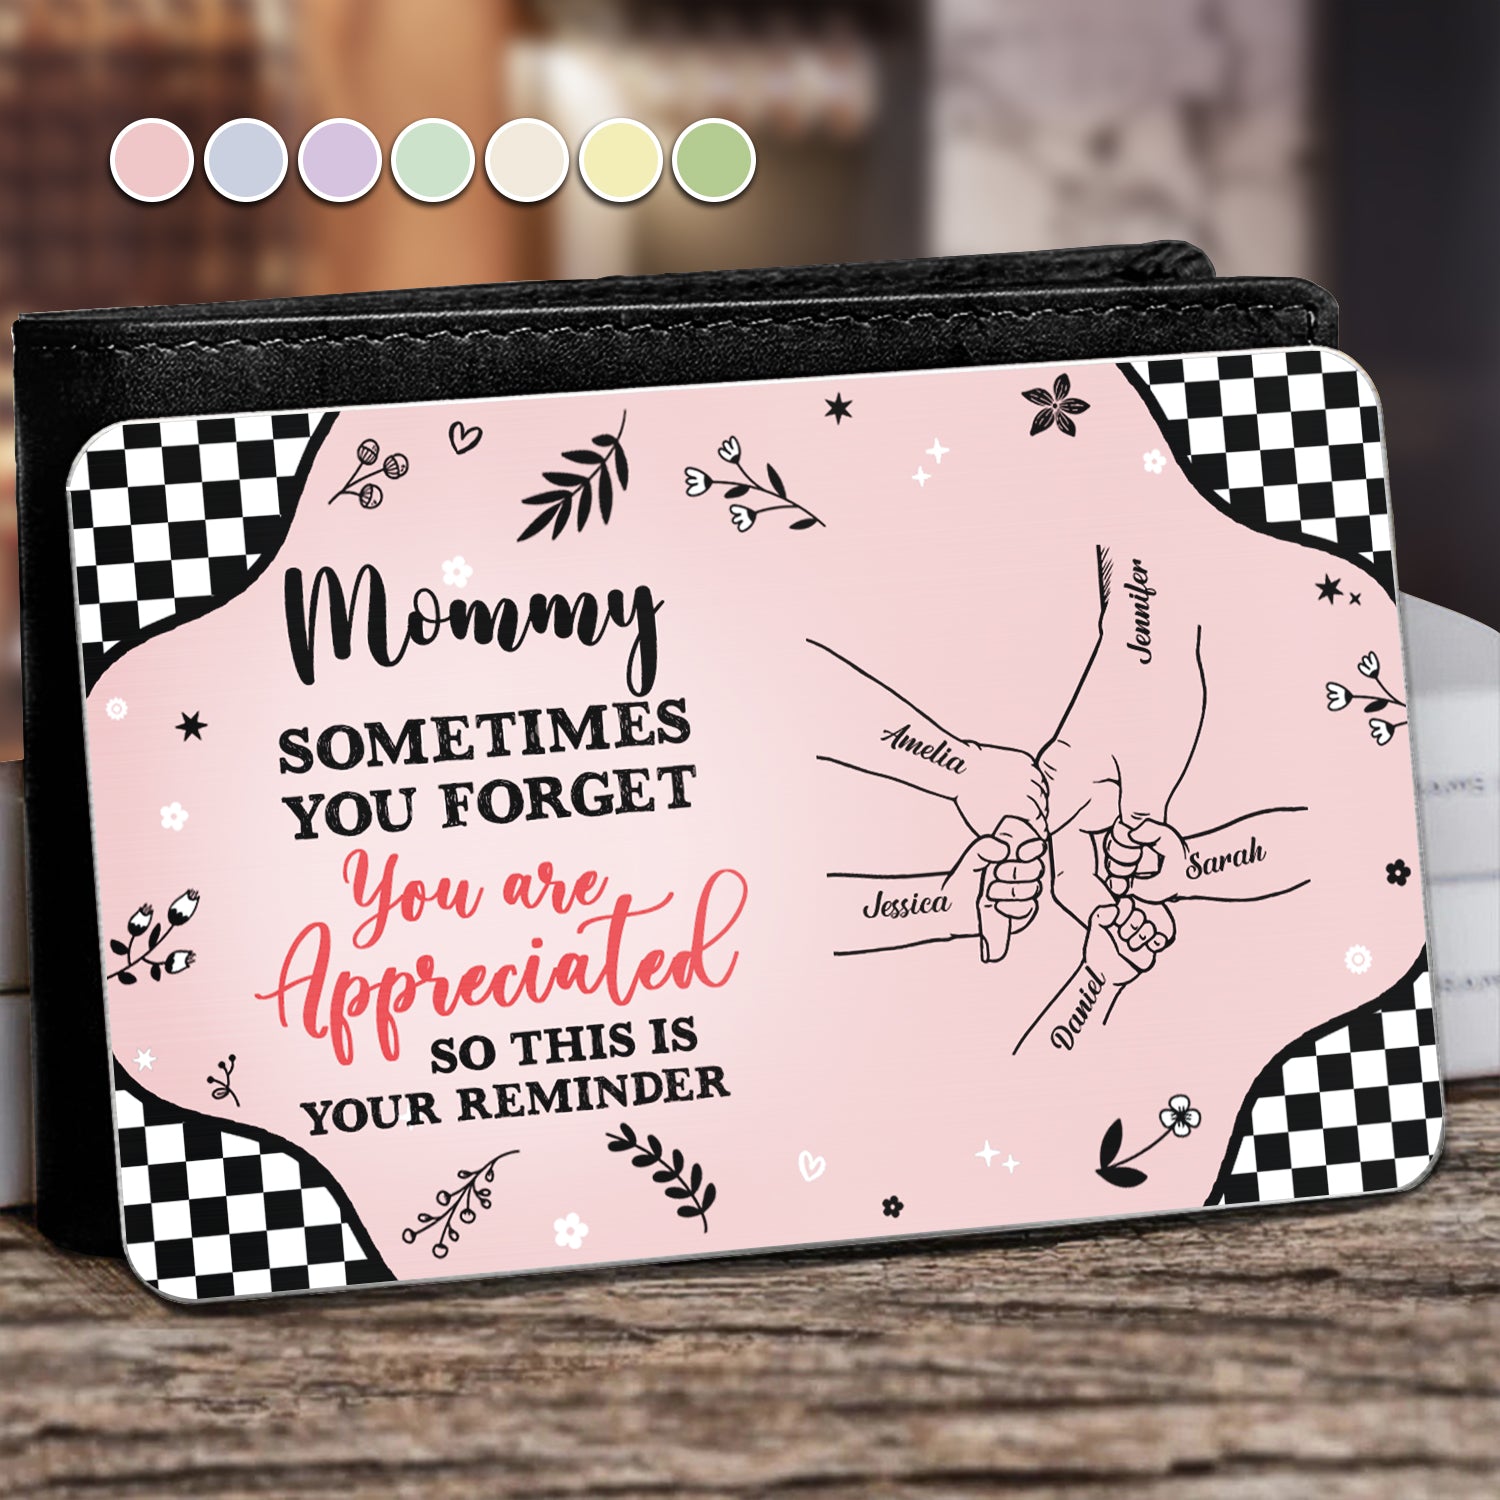 Sometimes You Forget You're Appreciated - Gift For Mother, Mom - Personalized Aluminum Wallet Card